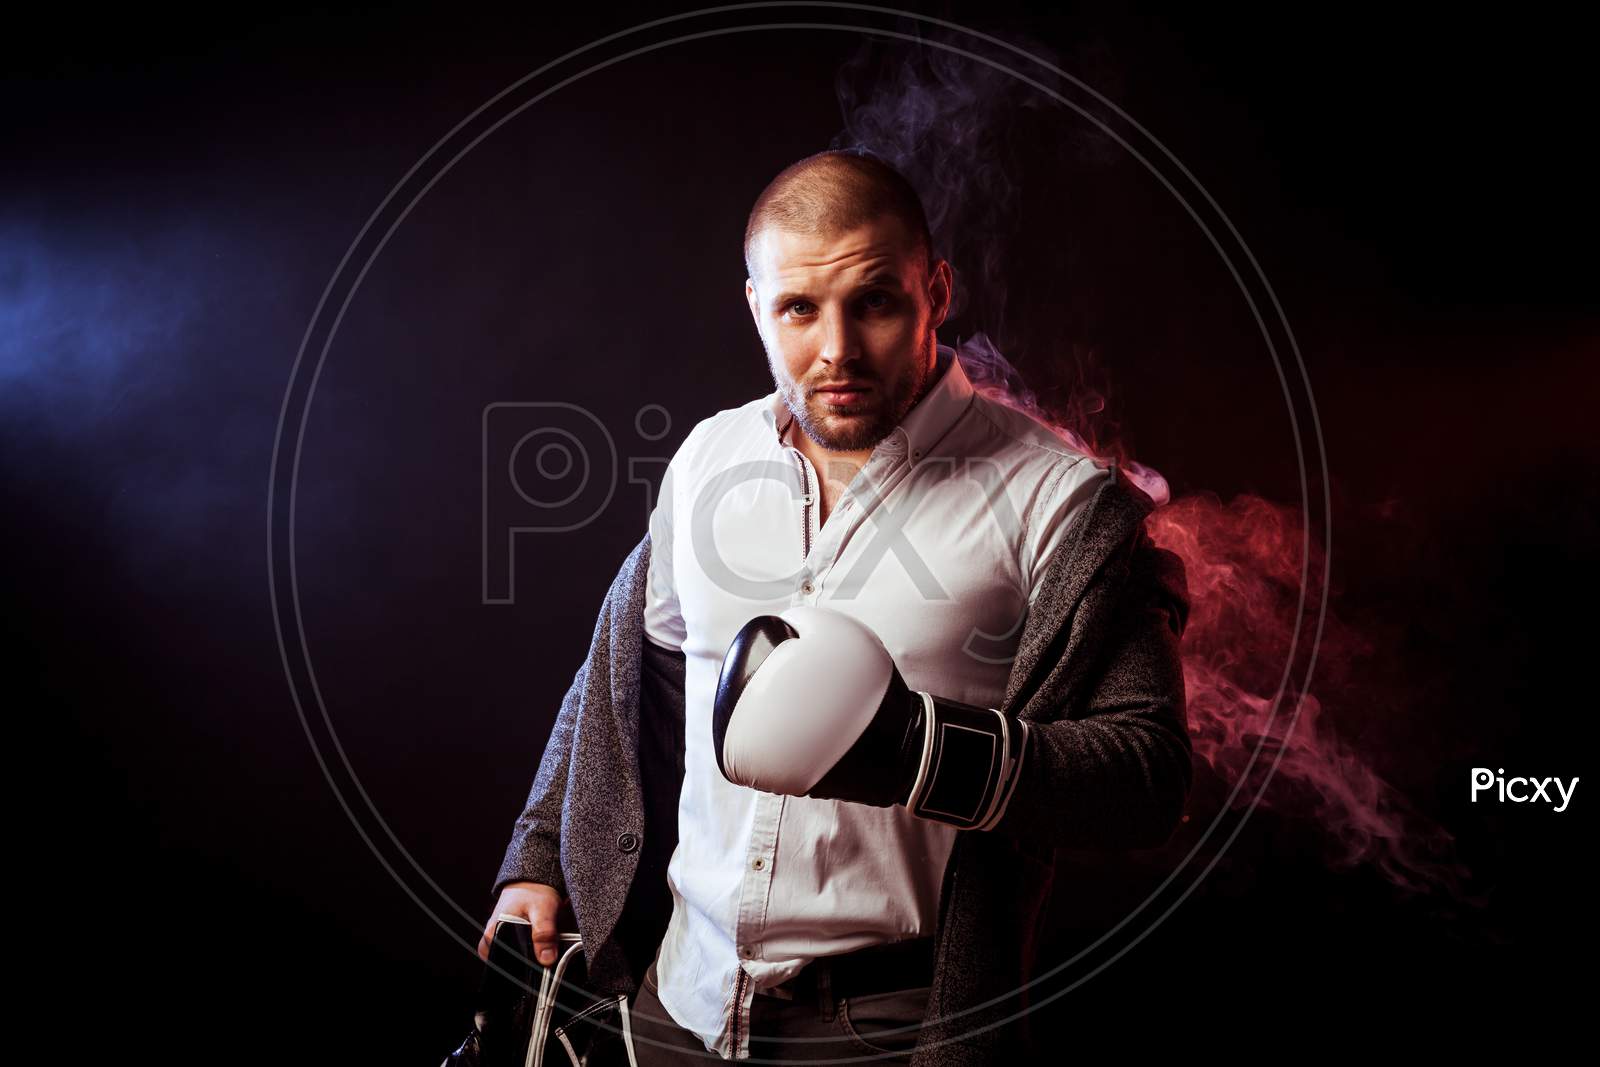 Young Handsome Man Businessman In White Shirt, Gray Suit, White And Black Gloves  Took Off His Jacket And Looked Inquiringly  Against Red  And Blue Smoke From A Vape  On Black Isolated